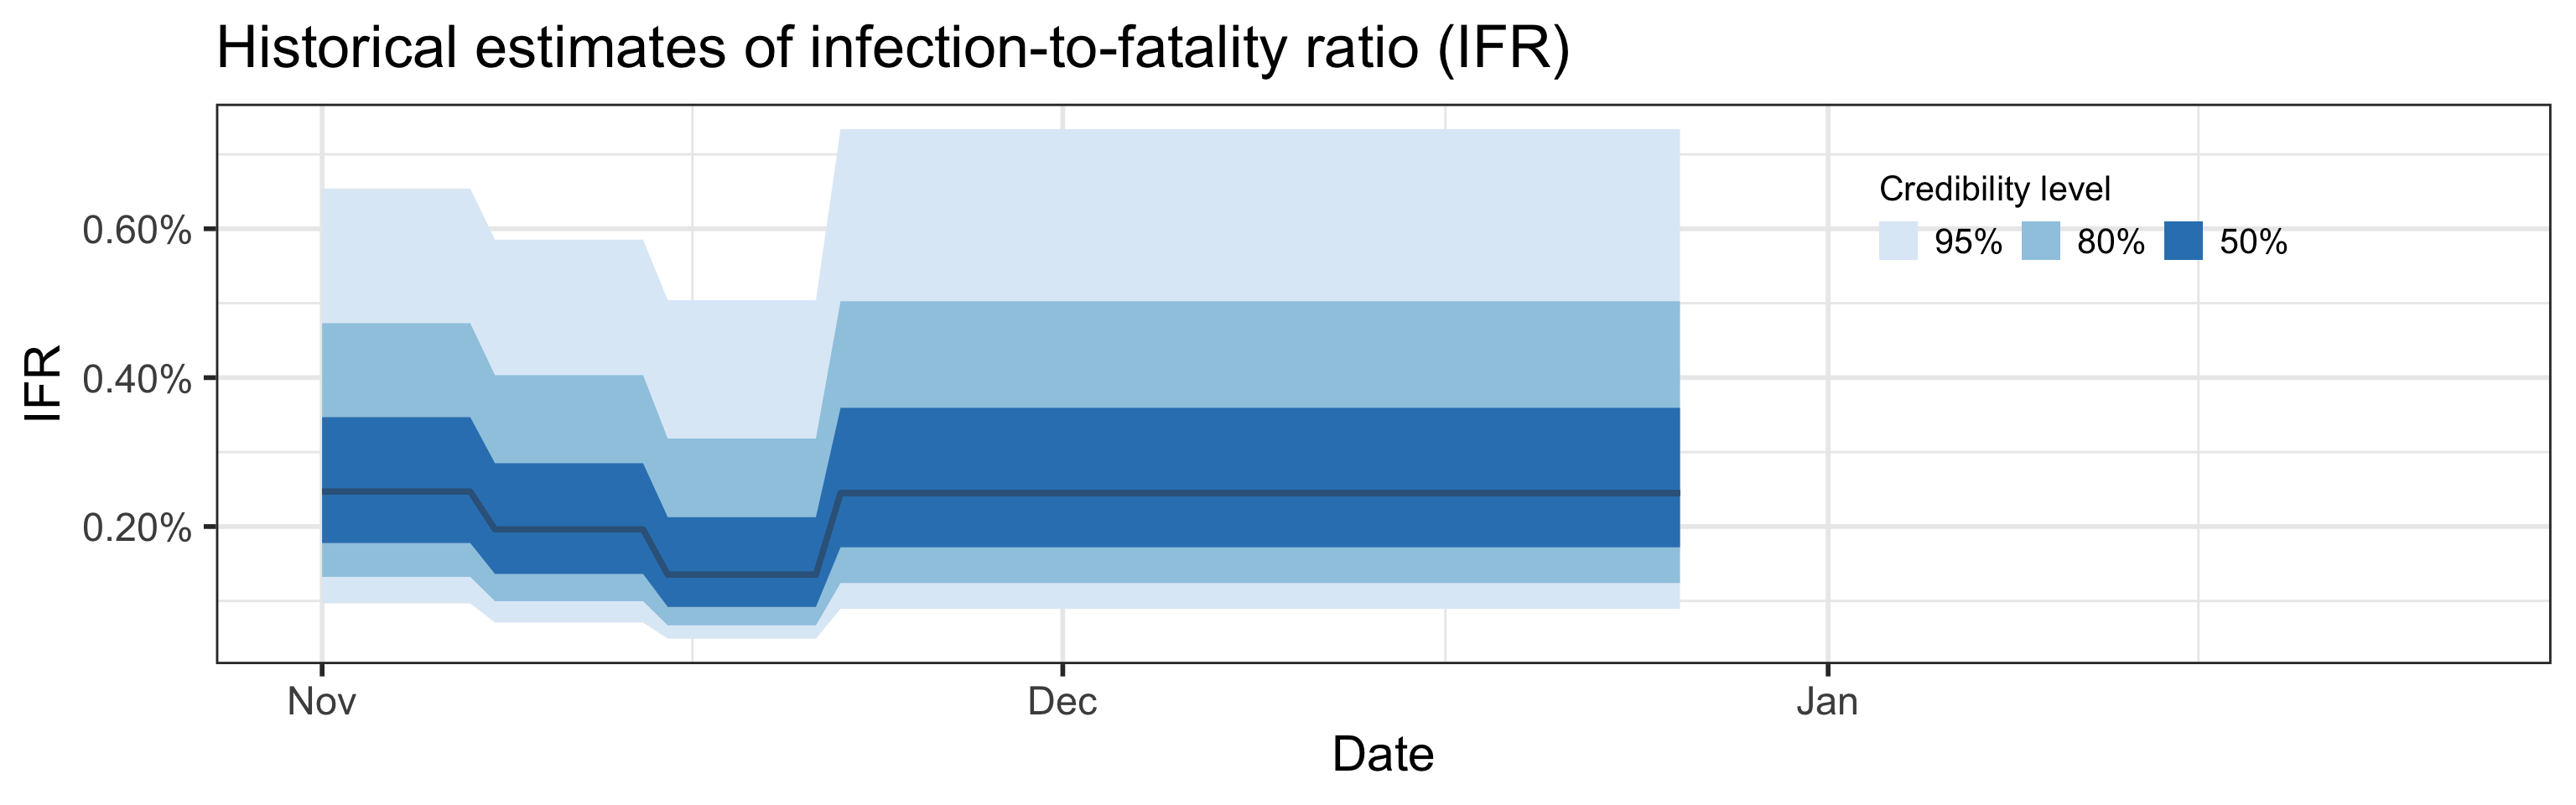 IFR R0 Plot-1.png